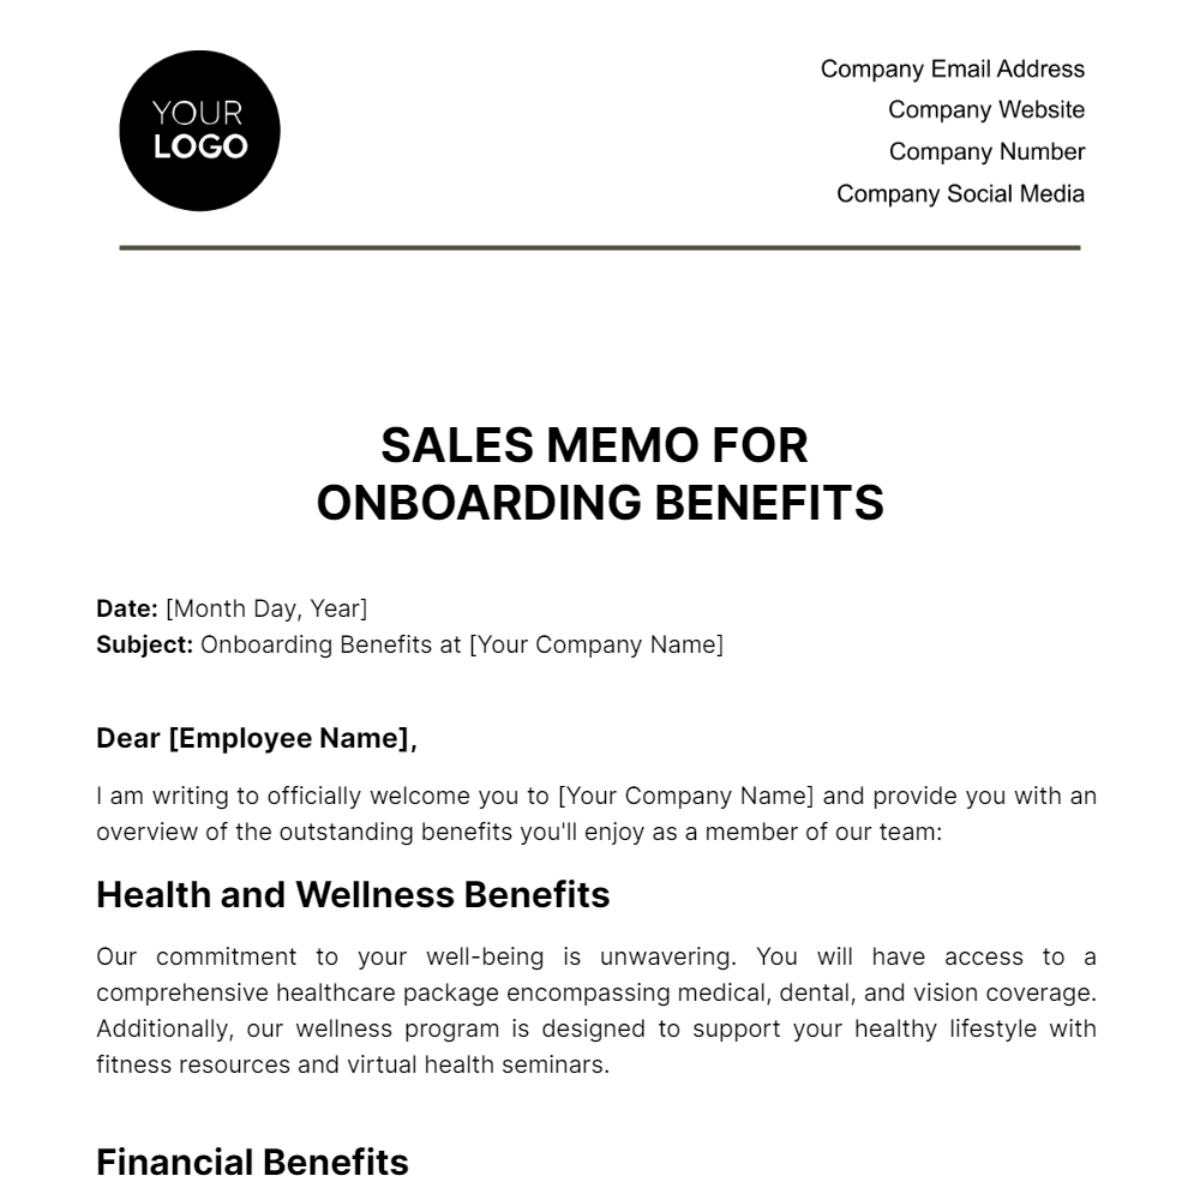 Free Sales Memo for Onboarding Benefits Template